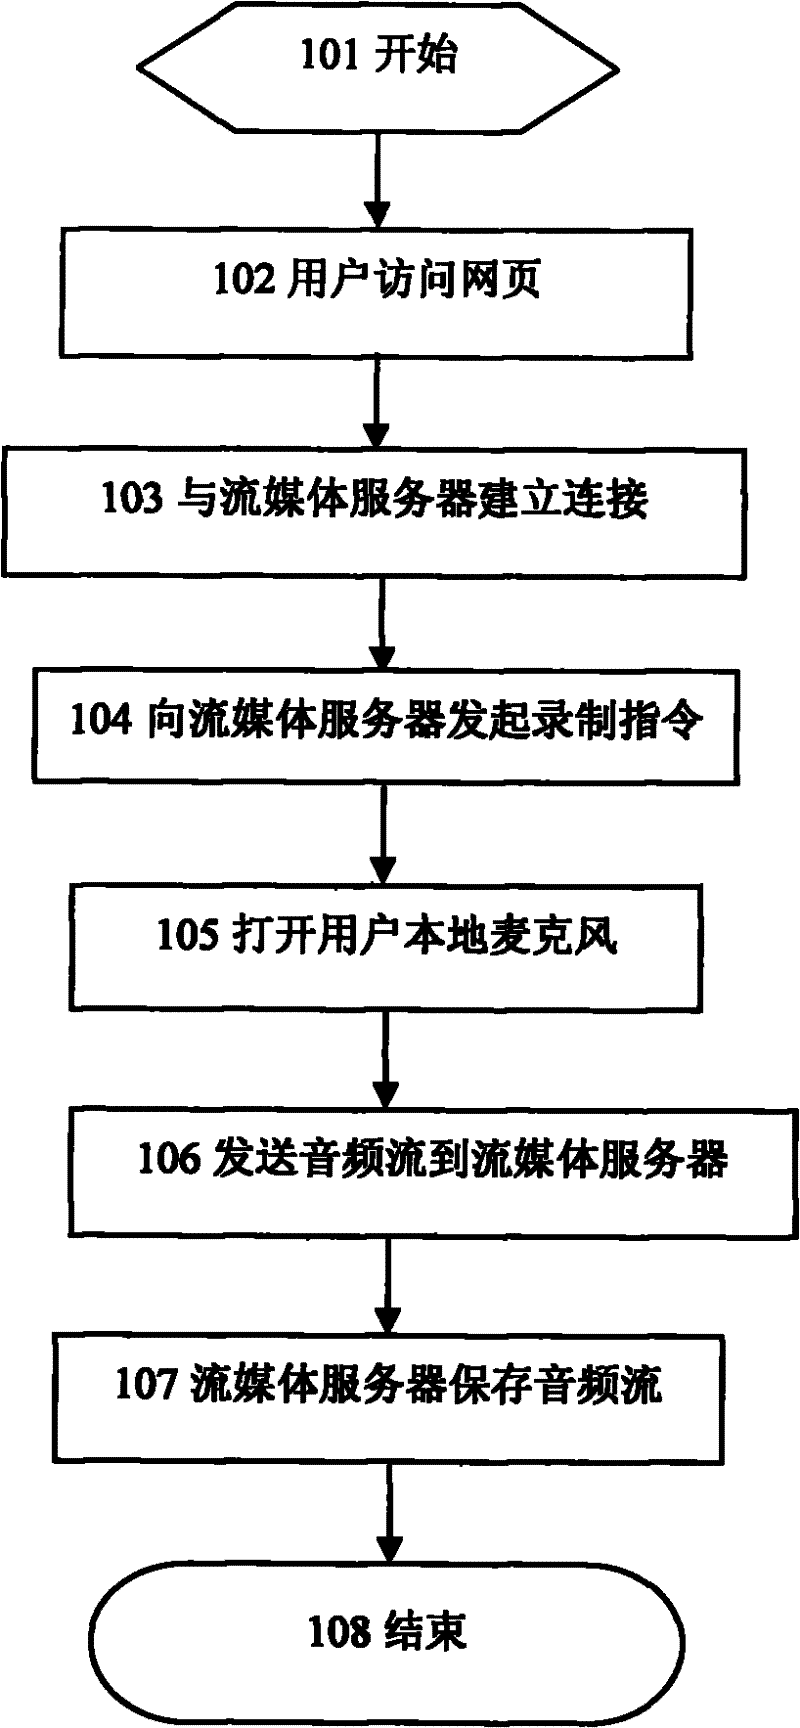 Method for realization of audio recording